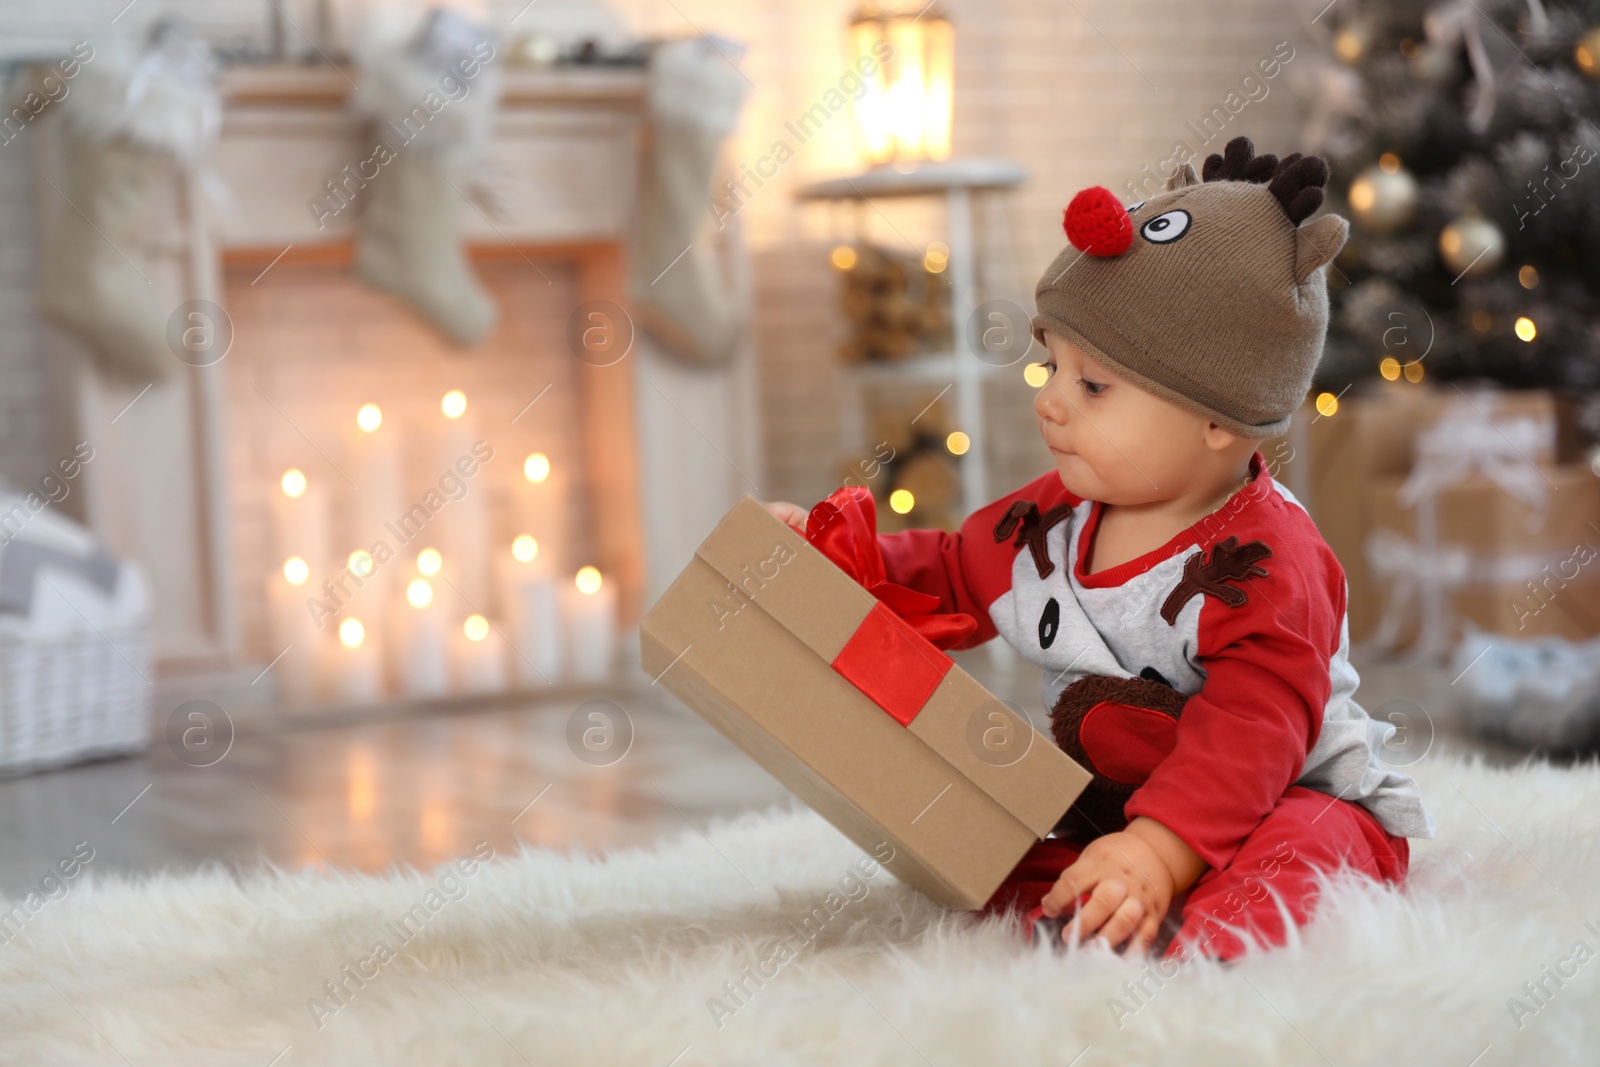 Photo of Little baby in festive Christmas costume playing with gift at home